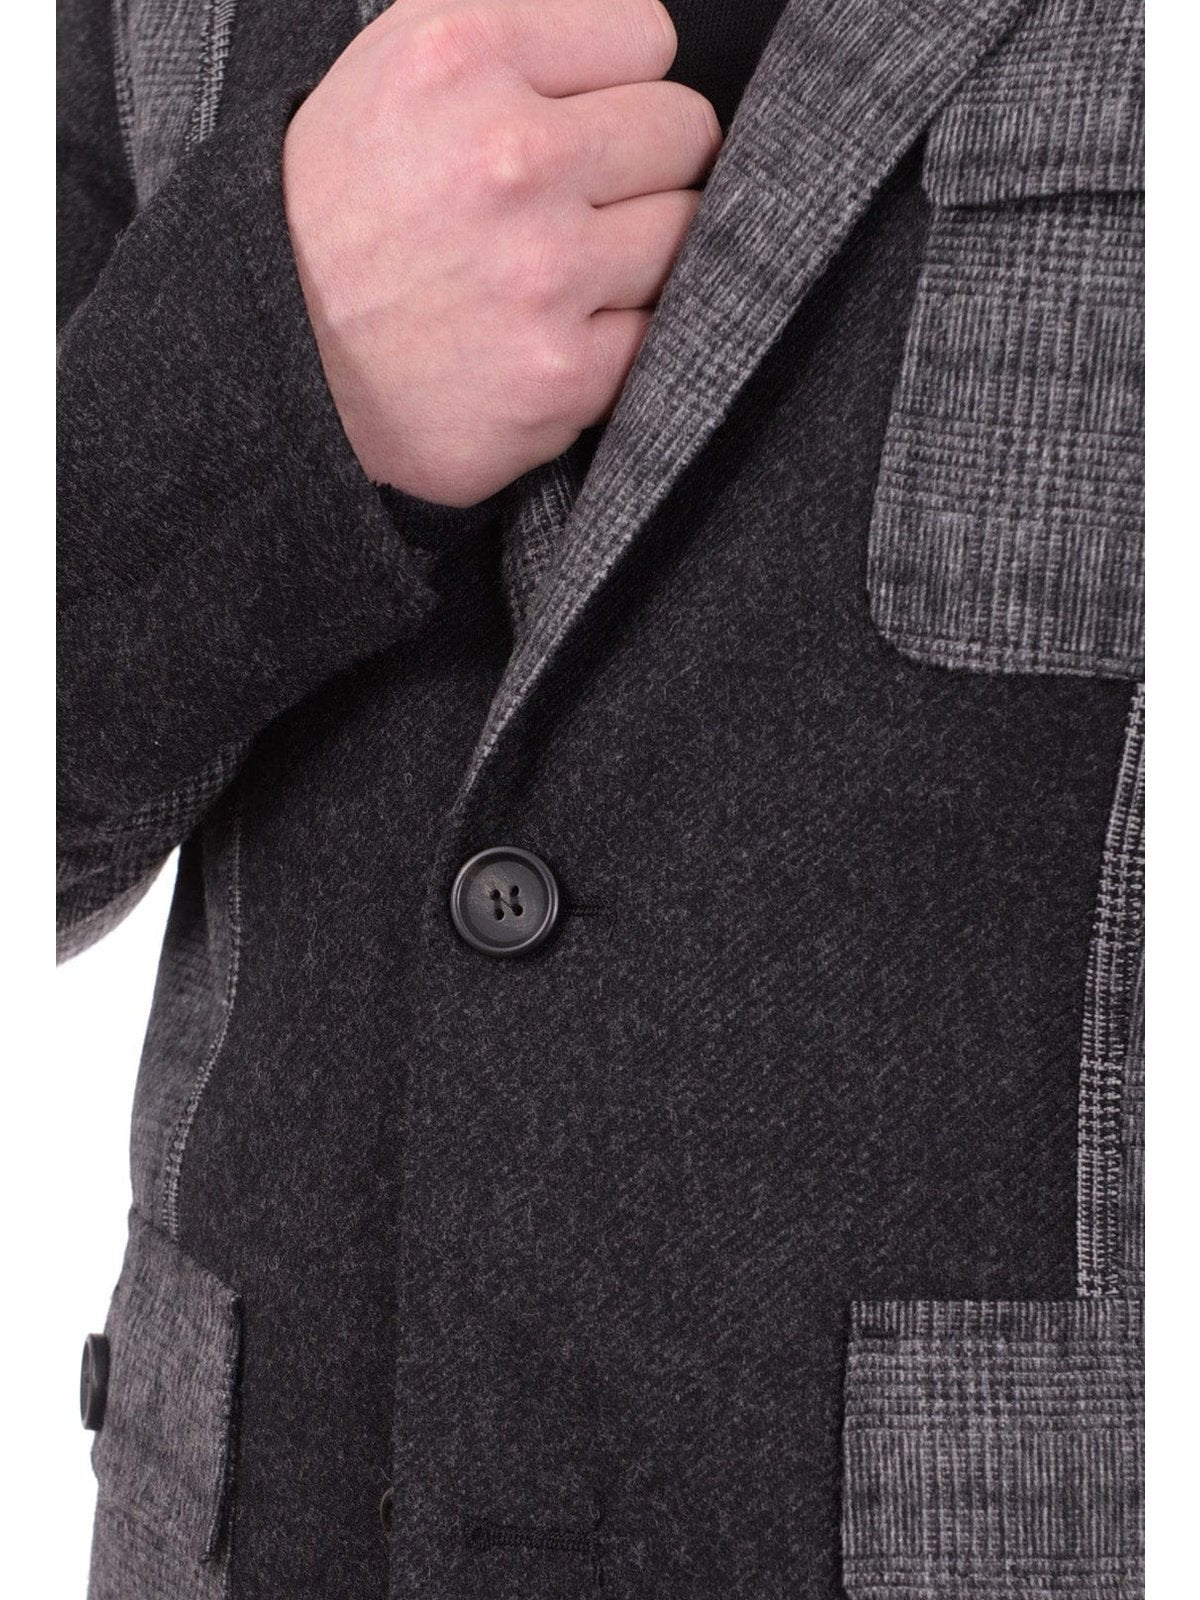 Napoli BLAZERS Mens Napoli Charcoal Gray Patchwork Unstructured Unlined Wool Sportcoat